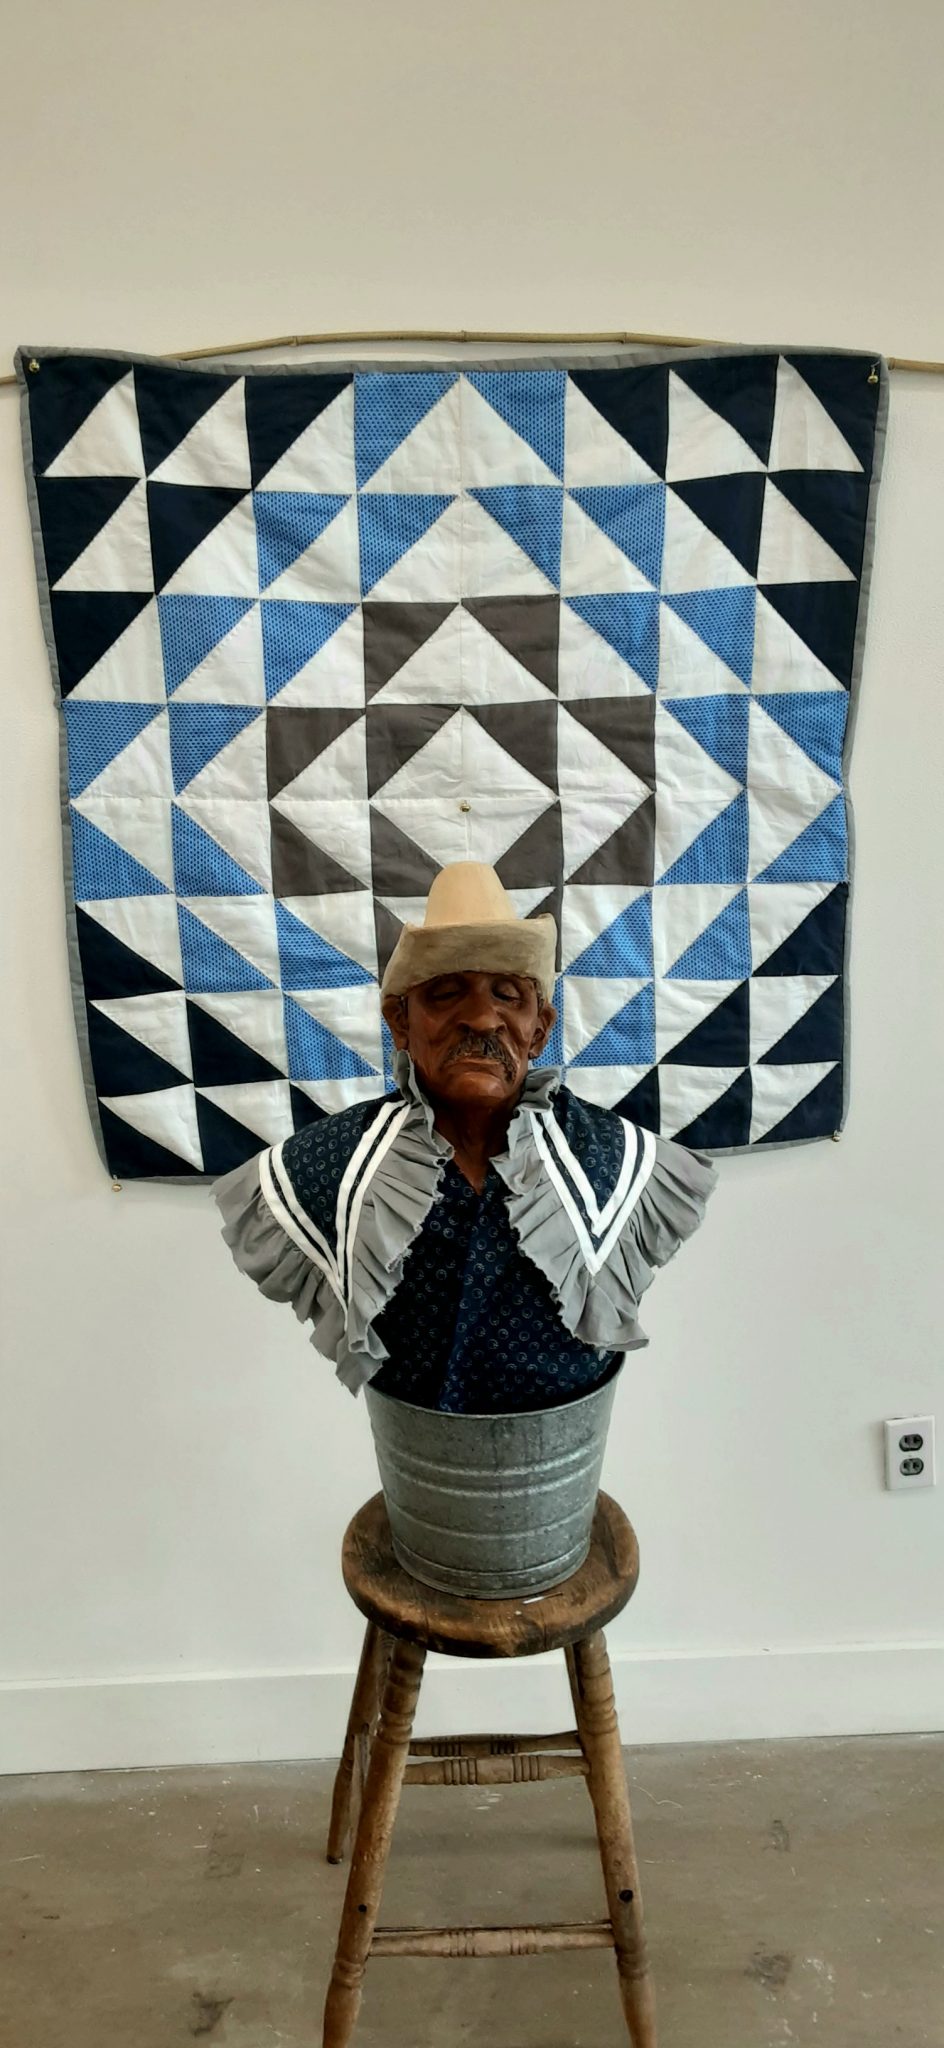 An artifact of a middle-aged man in front of a quilt